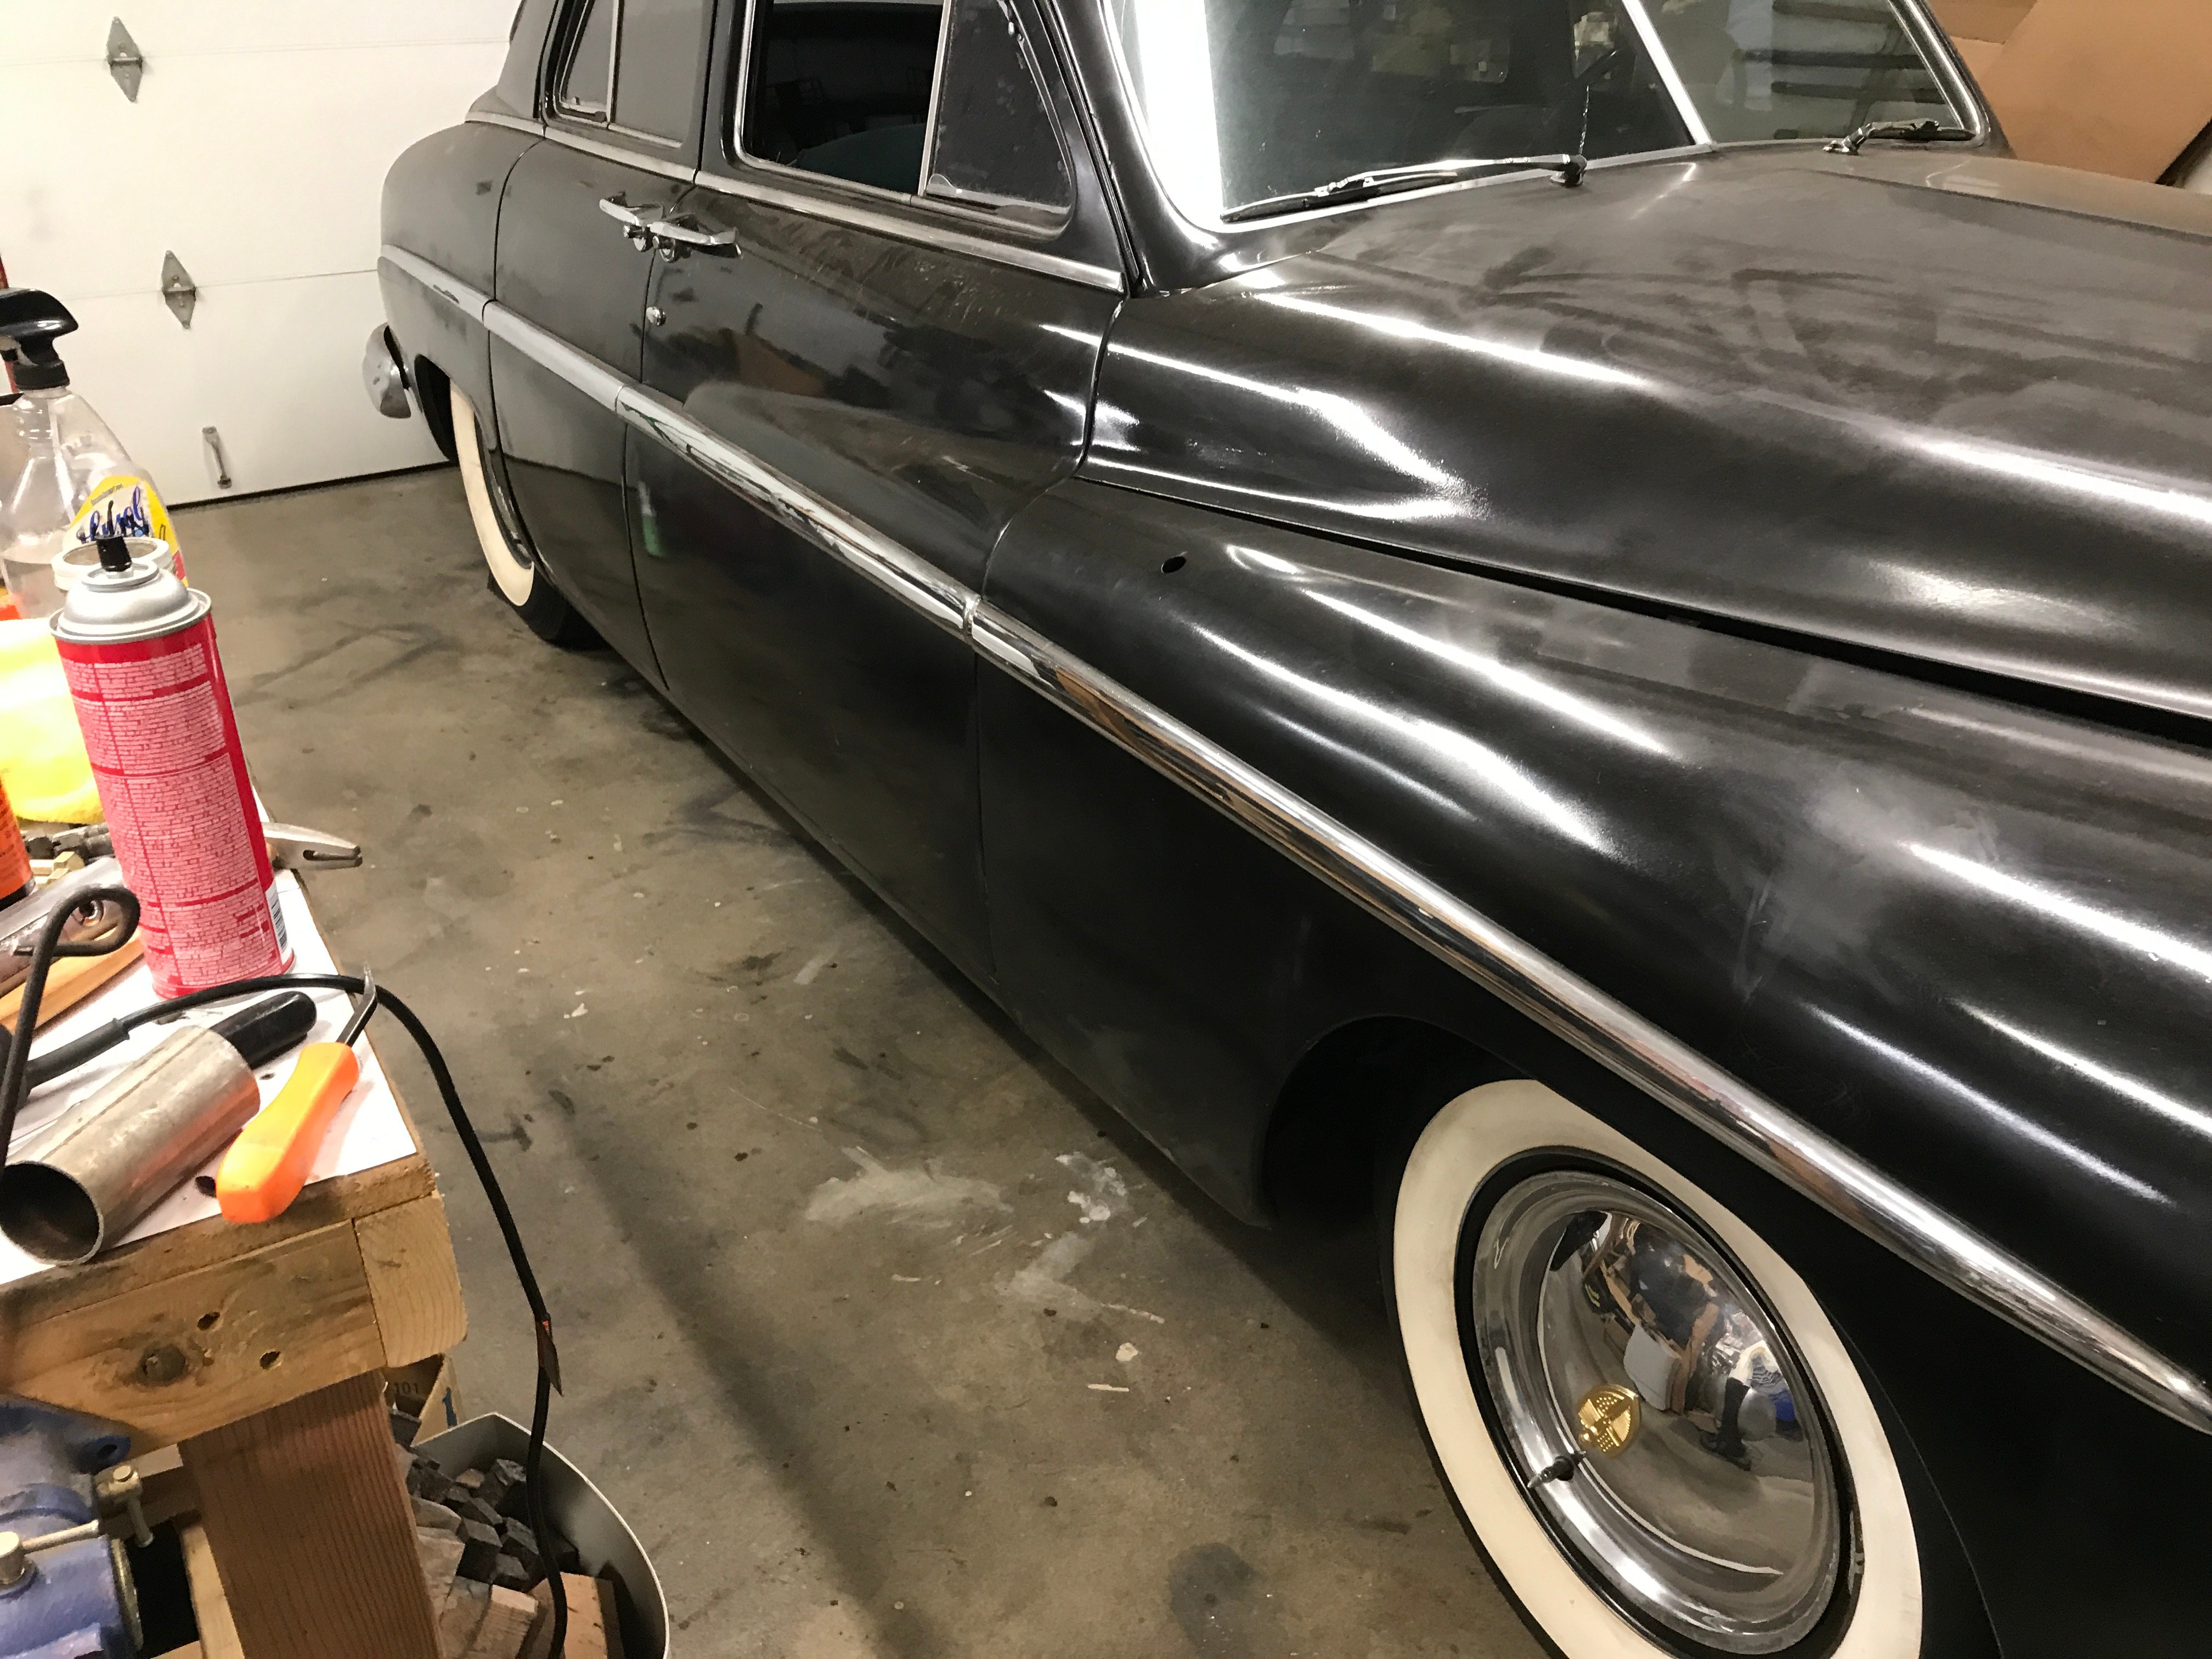 Ronald's 1950 Lincoln Lincoln - Holley My Garage